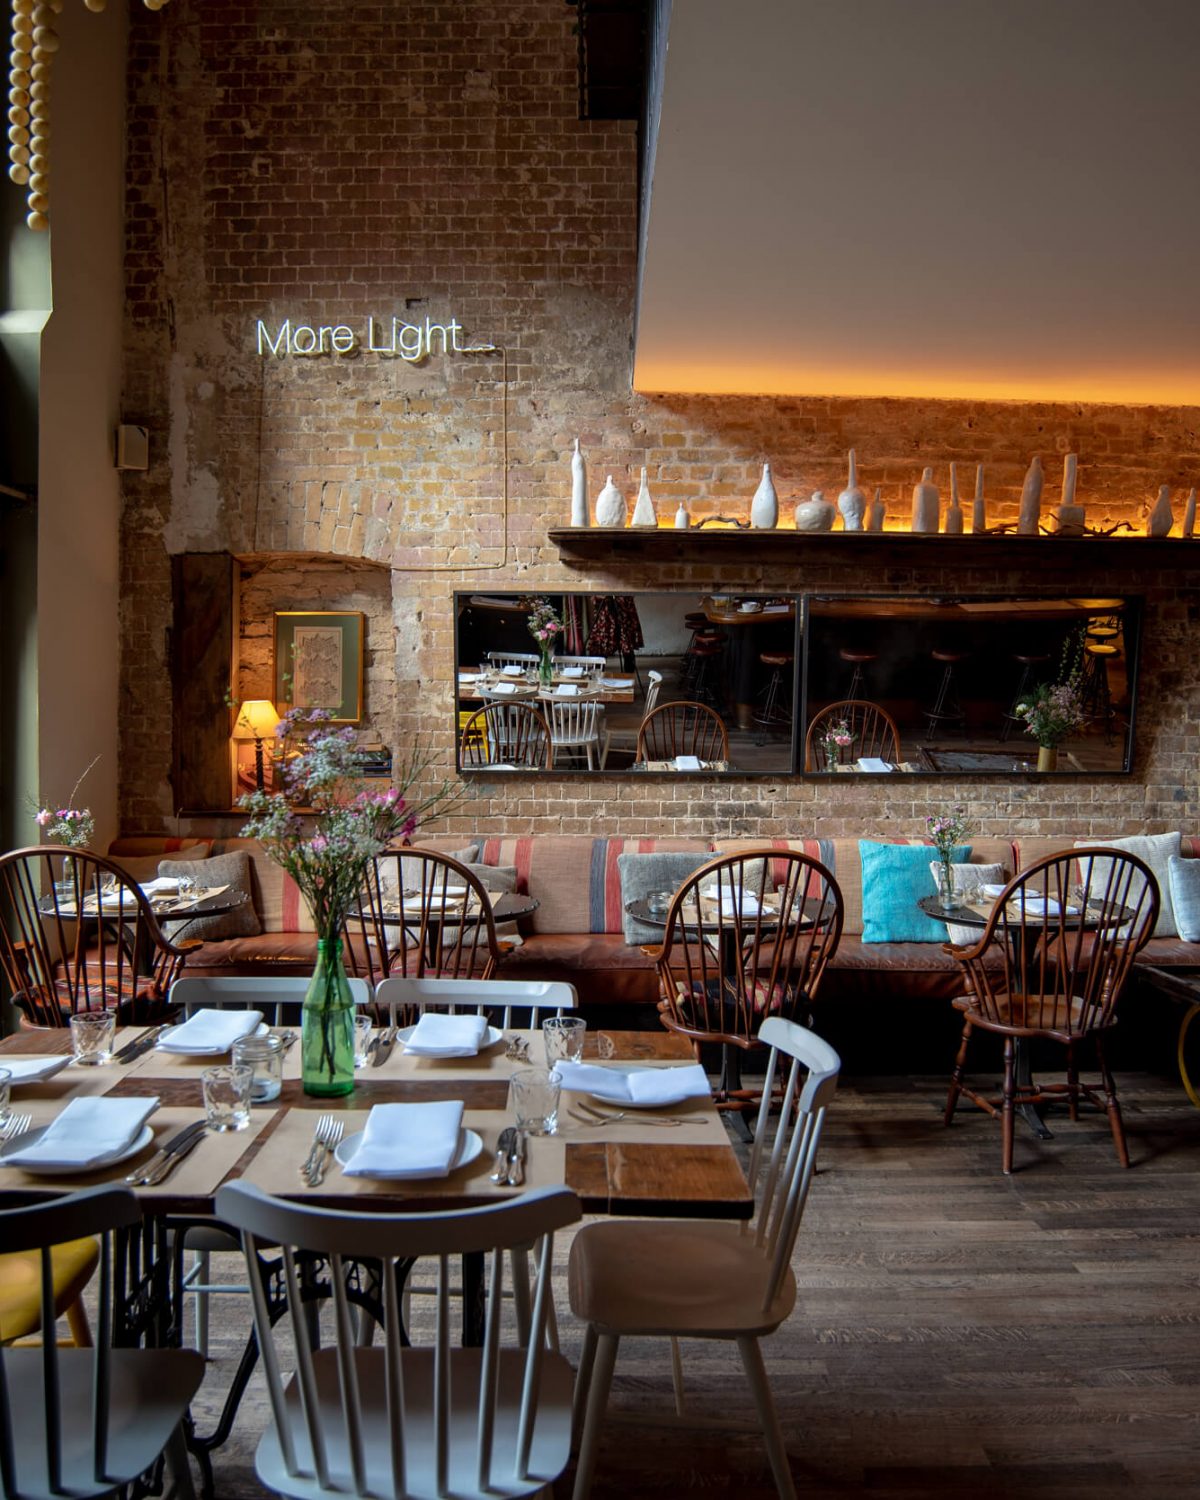 Stylishly furnished room on the ground floor of a Berlin restaurant with rustic brick walls, neon 'More Light' lettering, set tables and cosy seating areas.